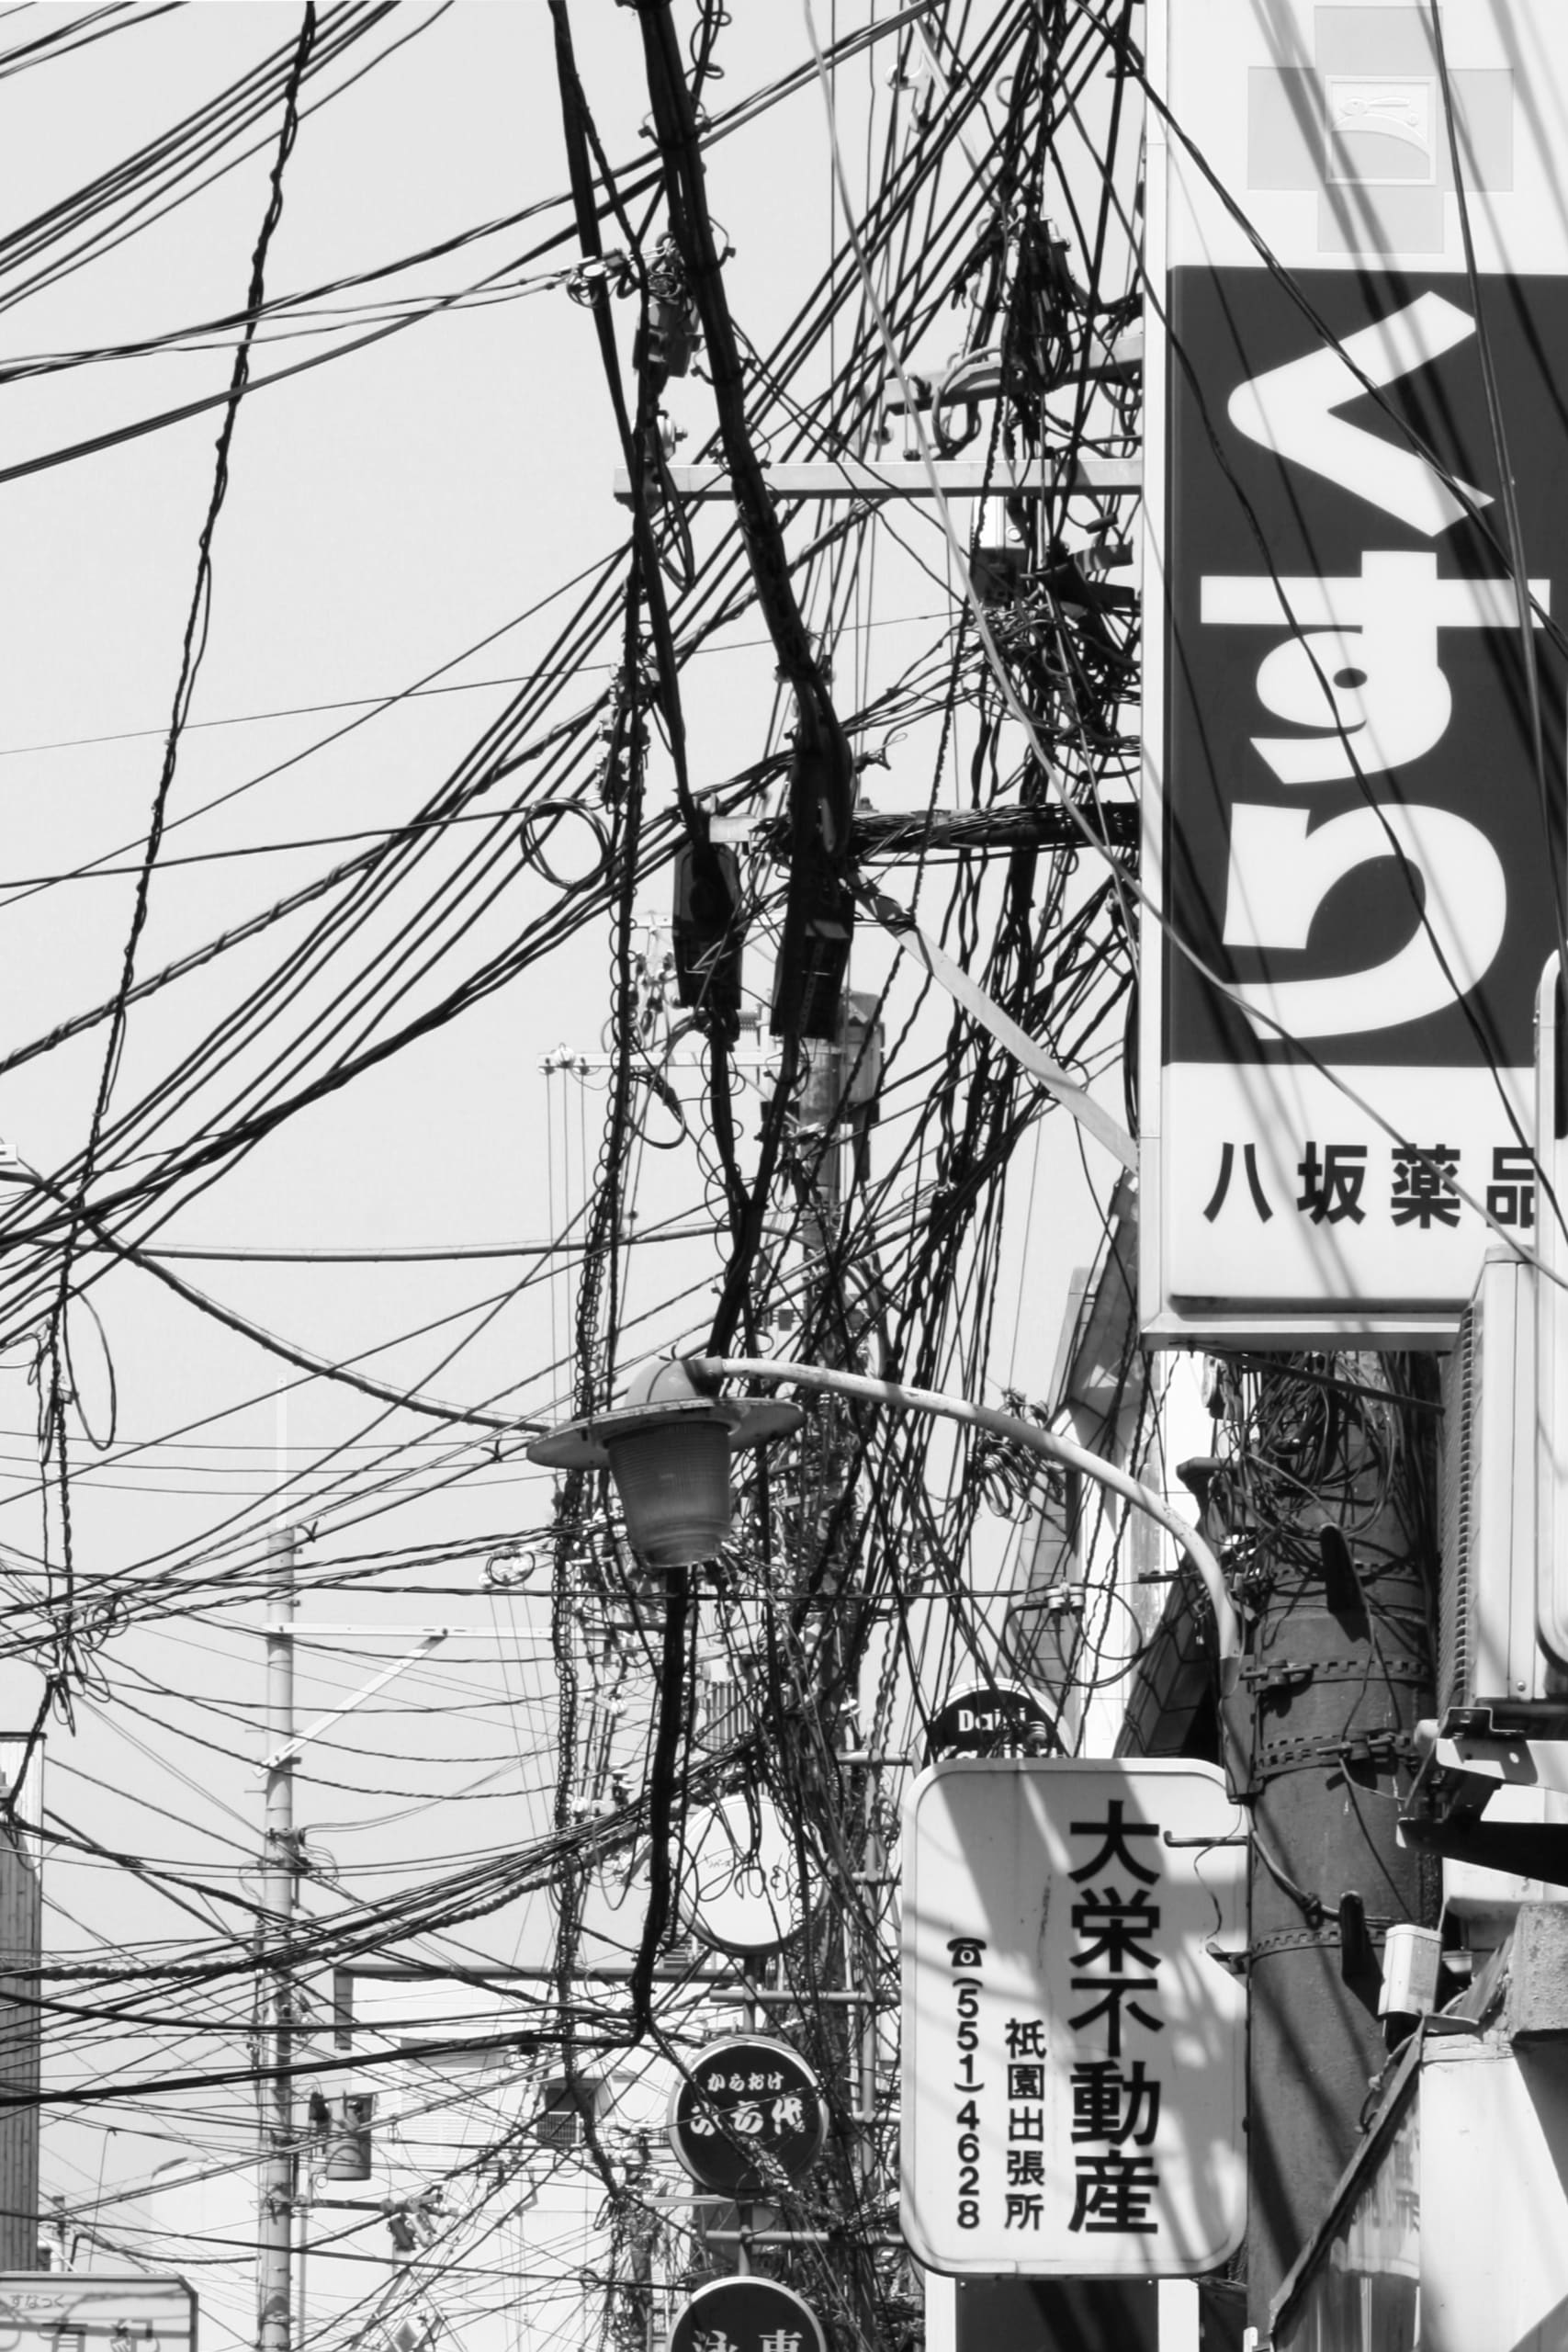 Black and white photo of excessive draping wires in Japan with a sign in Hirigana  kusuri meaning medicine in Japanese